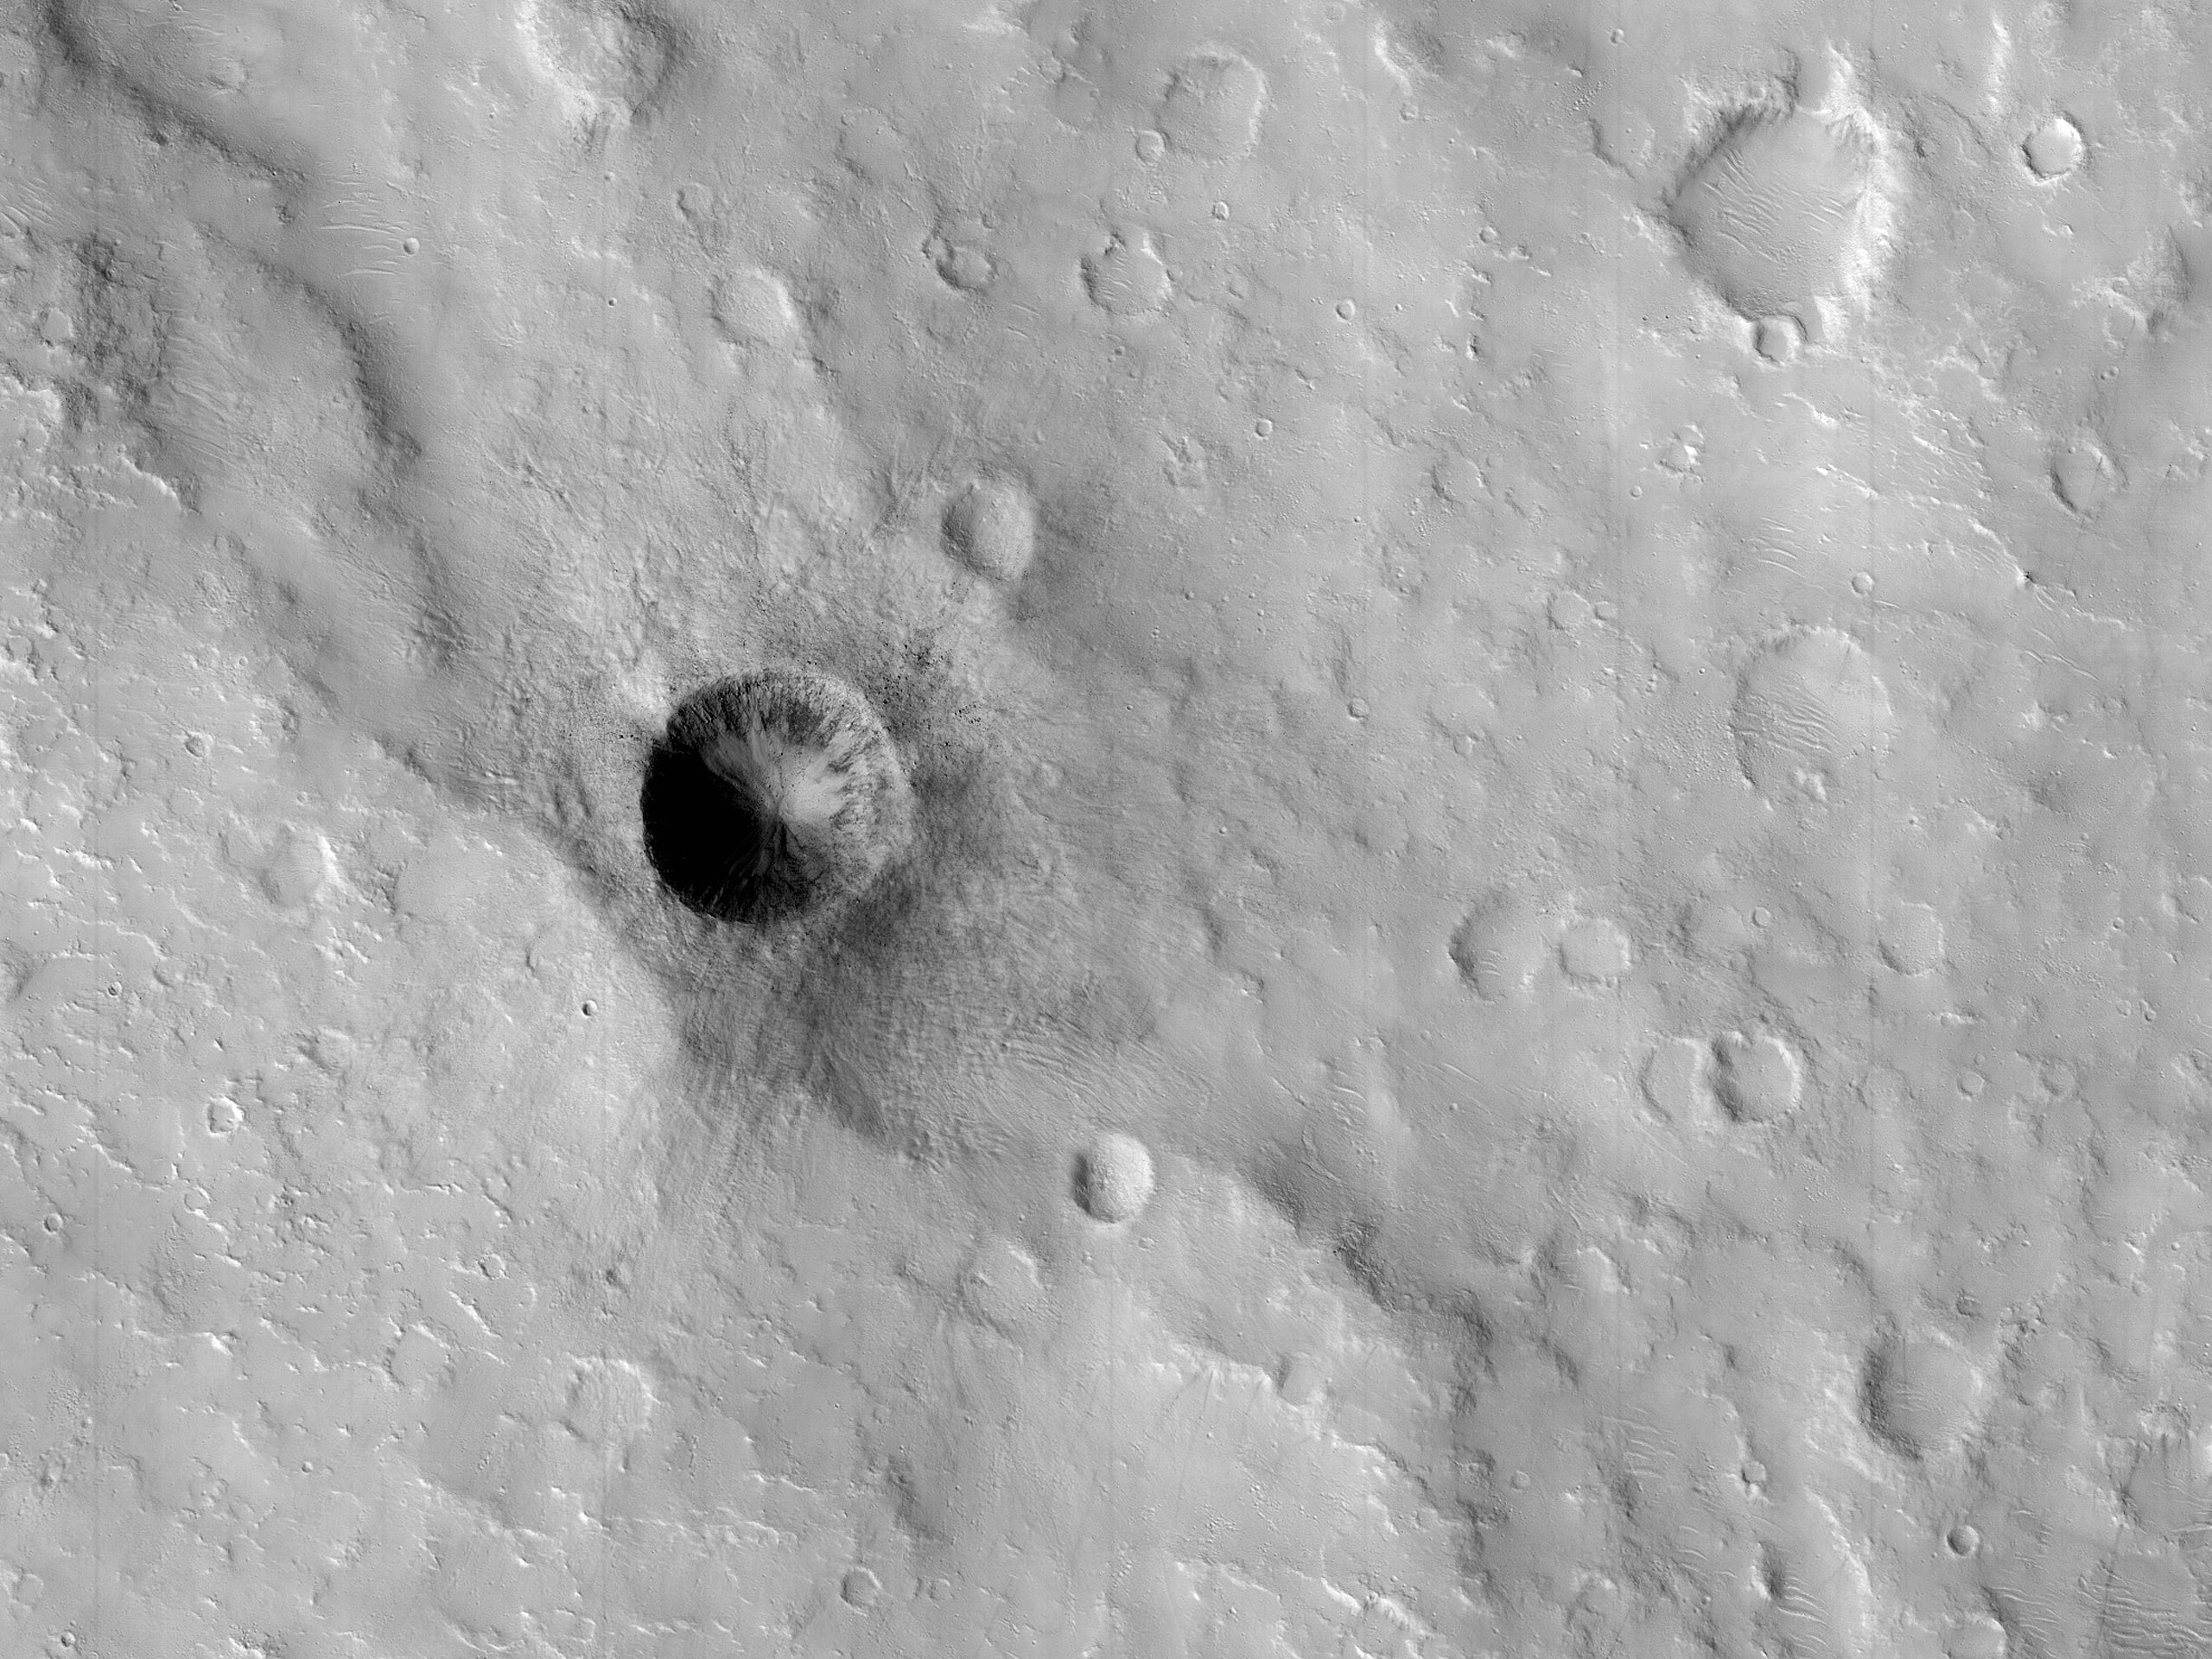 A Small Fresh Crater